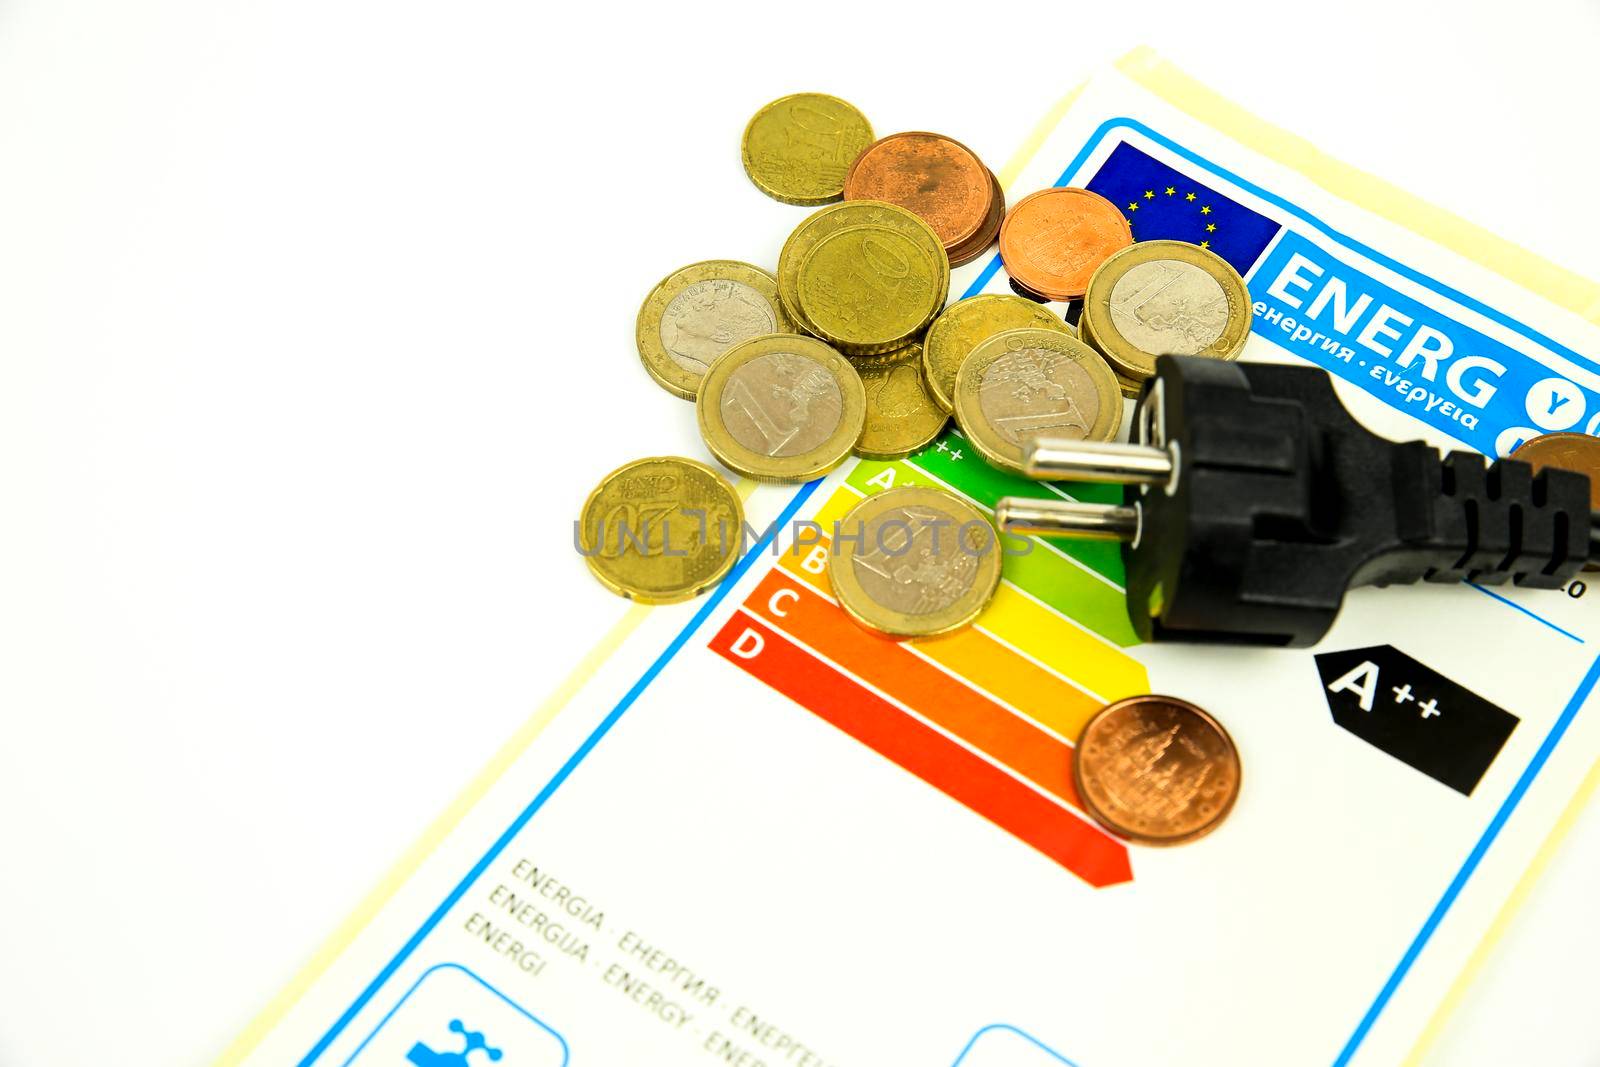 European Union Energy Label next to black pin power plug and coins